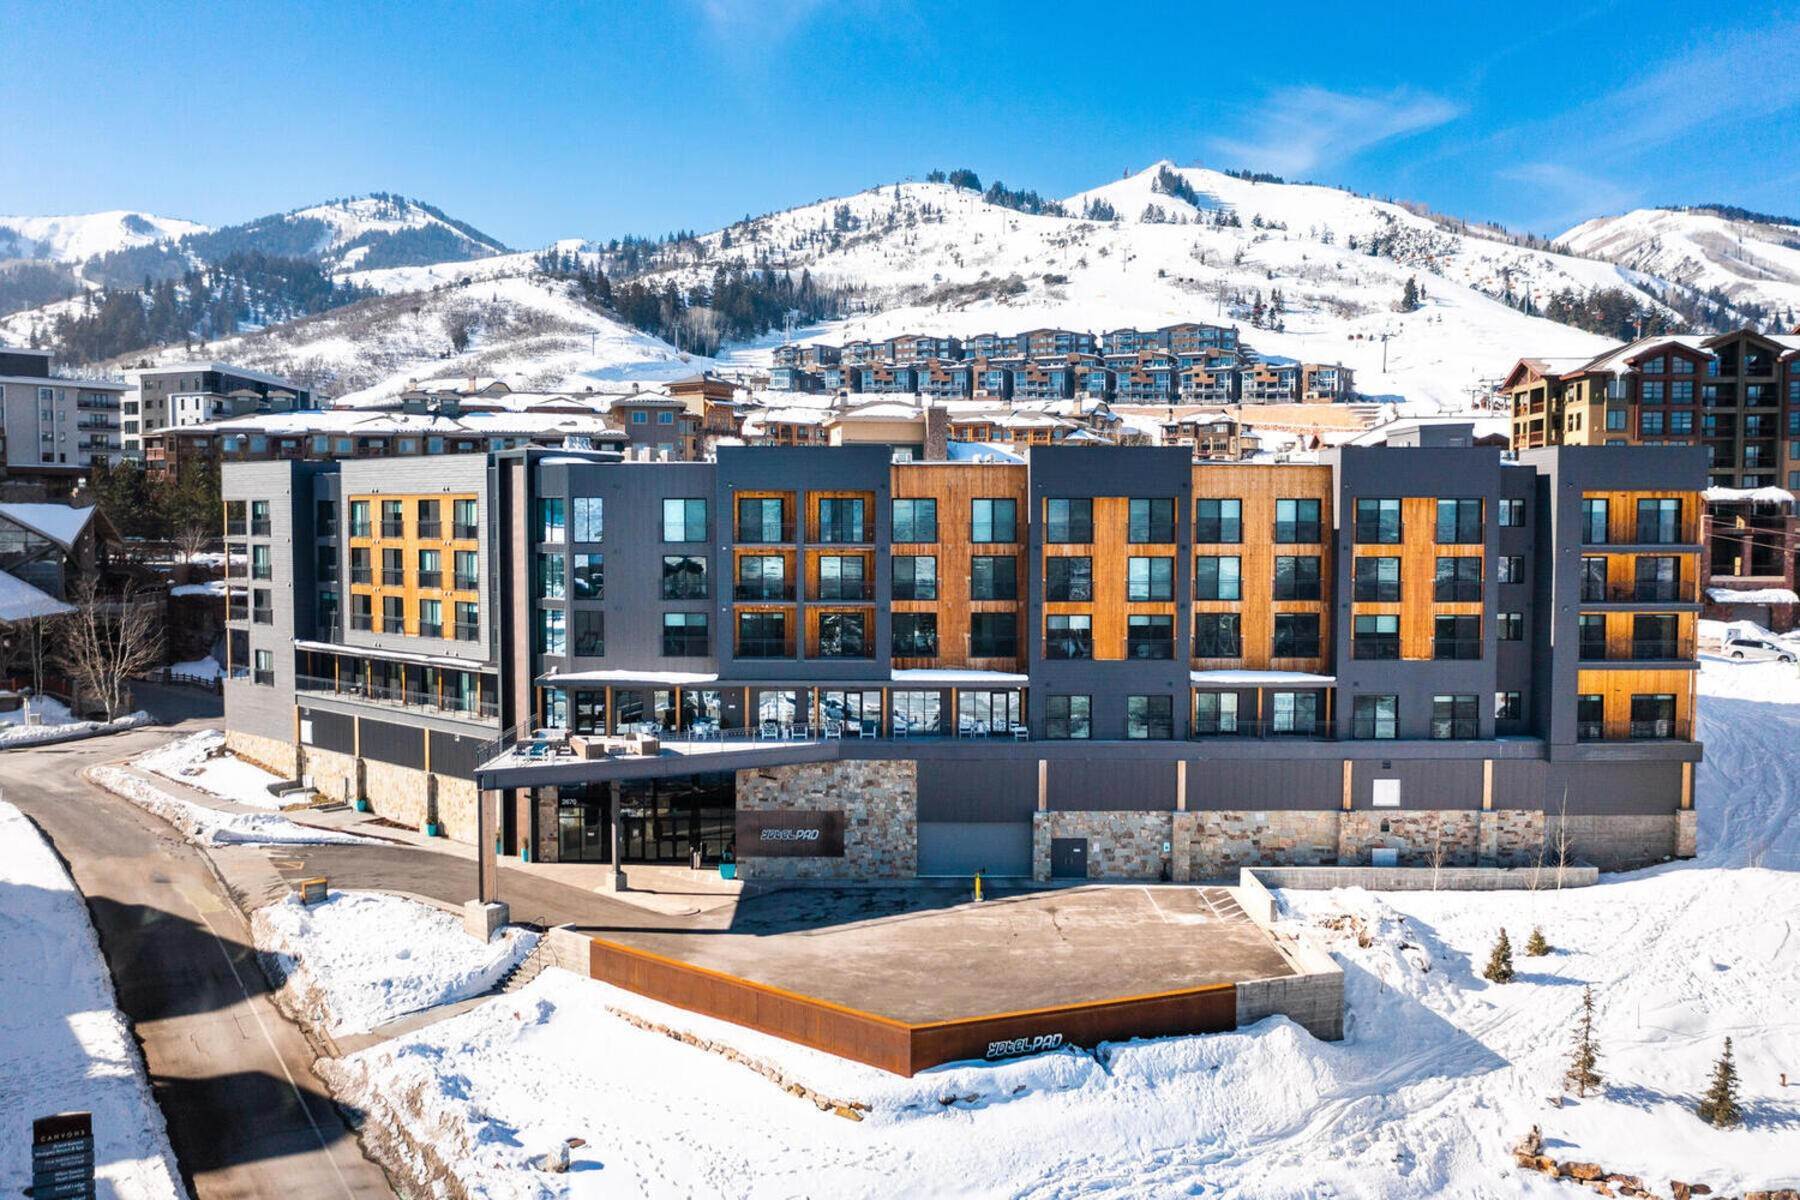 Single Family Homes for Sale at Highly Sought after Premium Top Floor 1 Bedroom YOTELPAD with Down Valley Views 2670 W Canyons Resort Dr #437 Park City, Utah 84098 United States